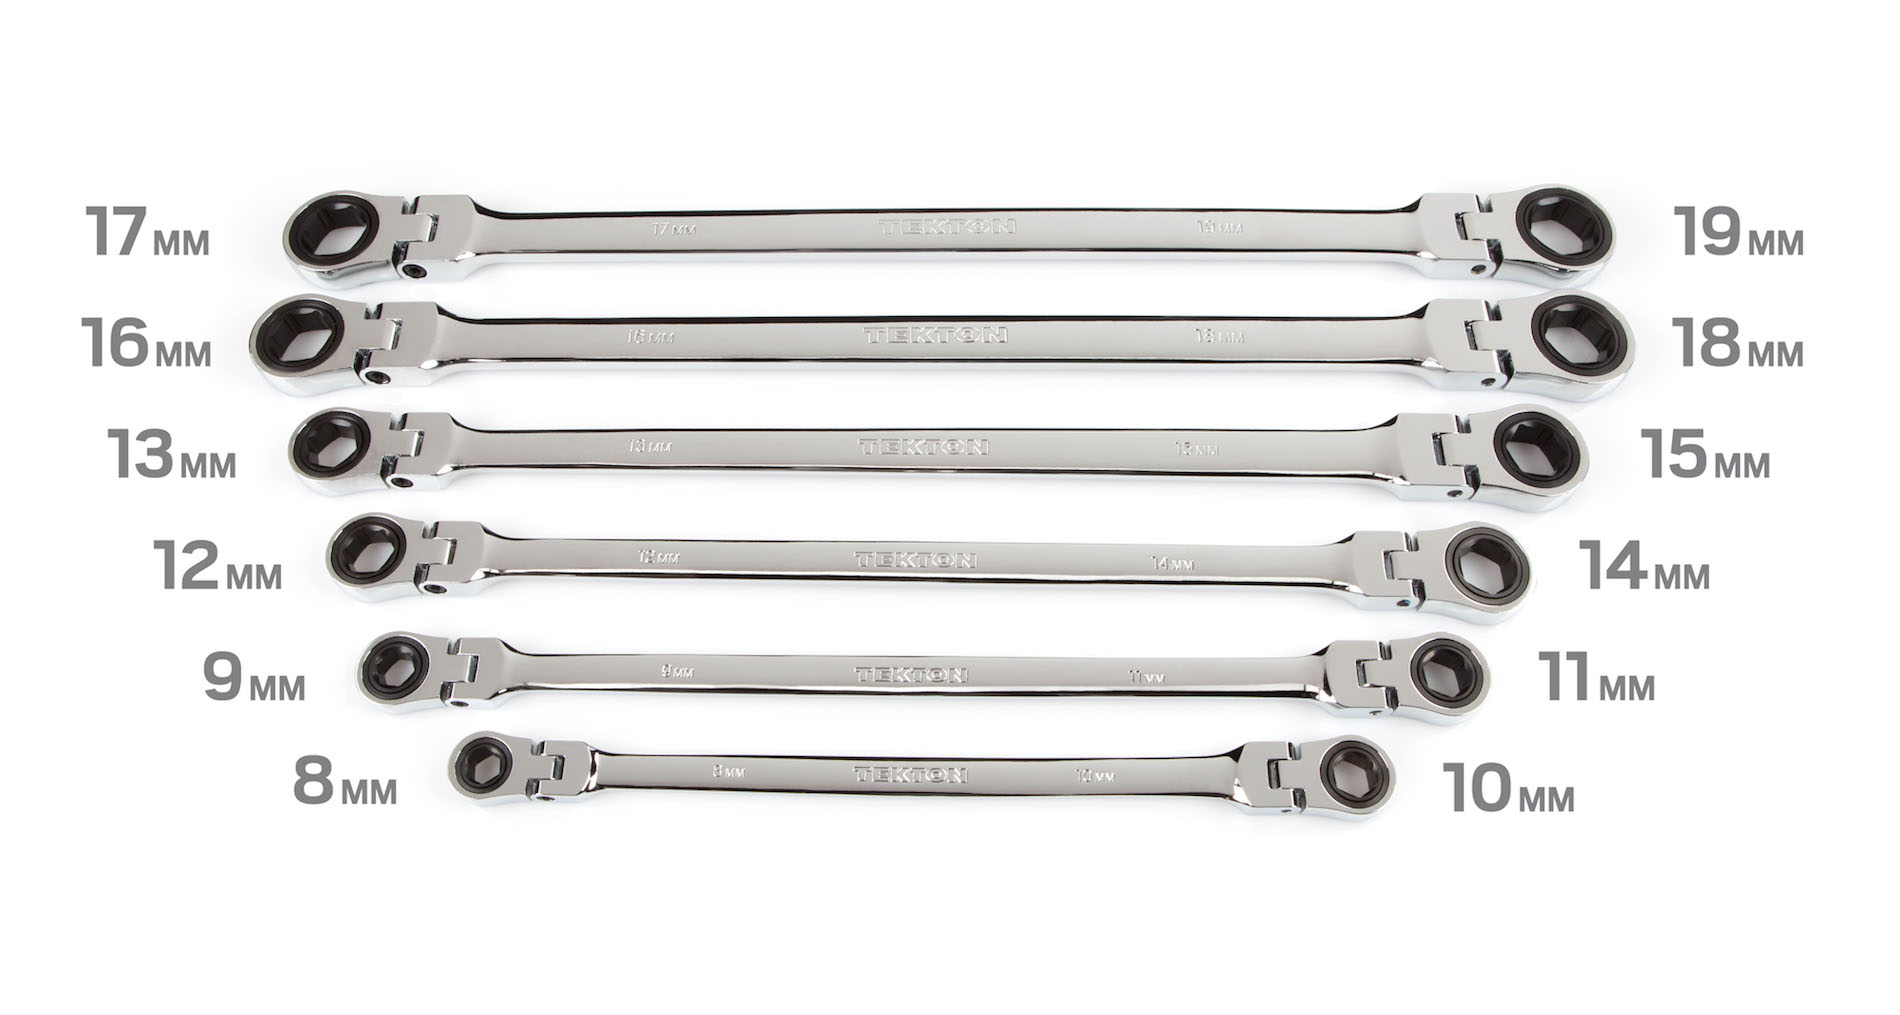 Sizes of ratcheting wrenches included in 6-piece set